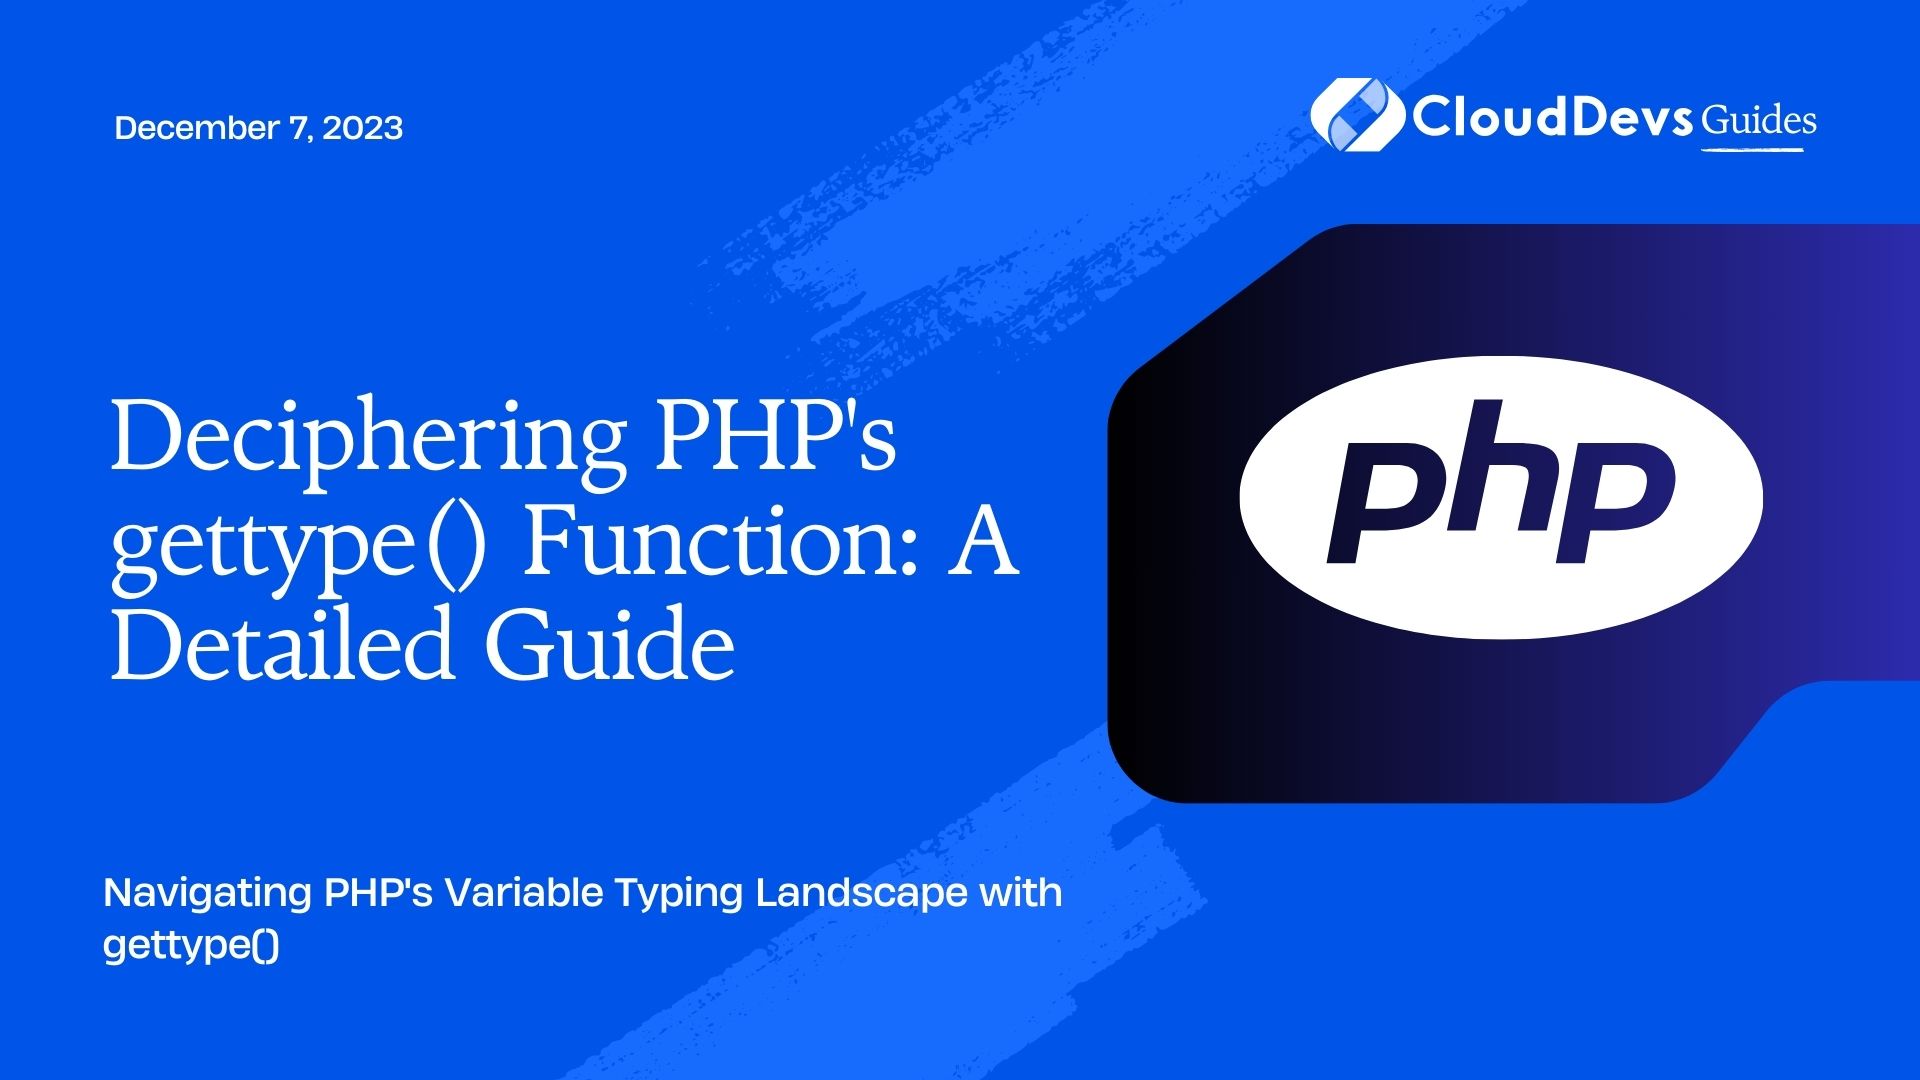 Deciphering PHP's gettype() Function: A Detailed Guide